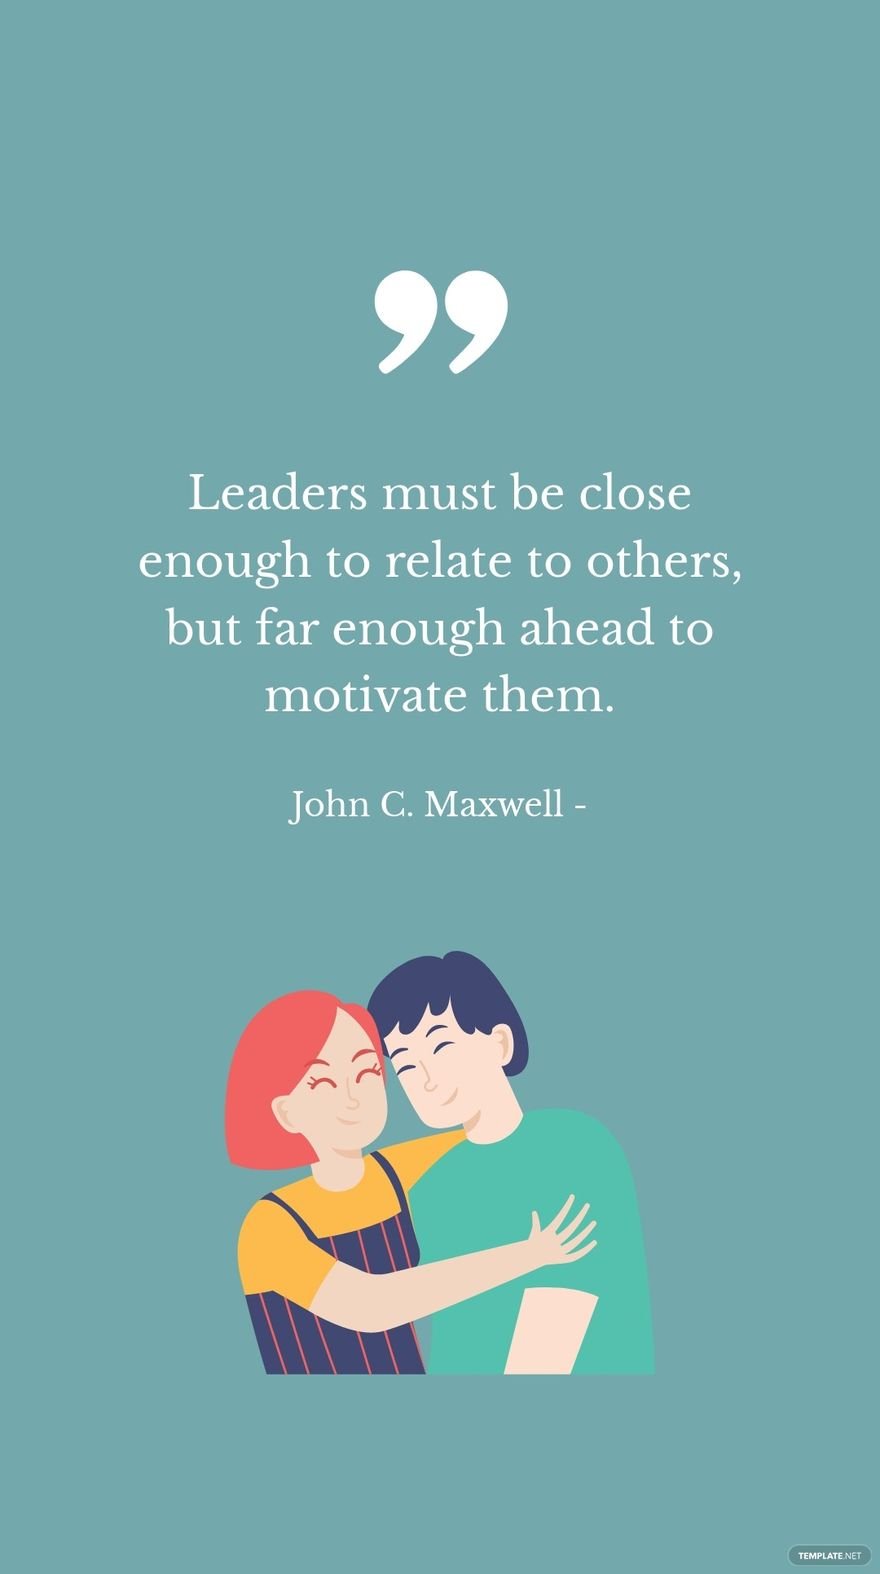 John C. Maxwell - Leaders must be close enough to relate to others, but far enough ahead to motivate them.